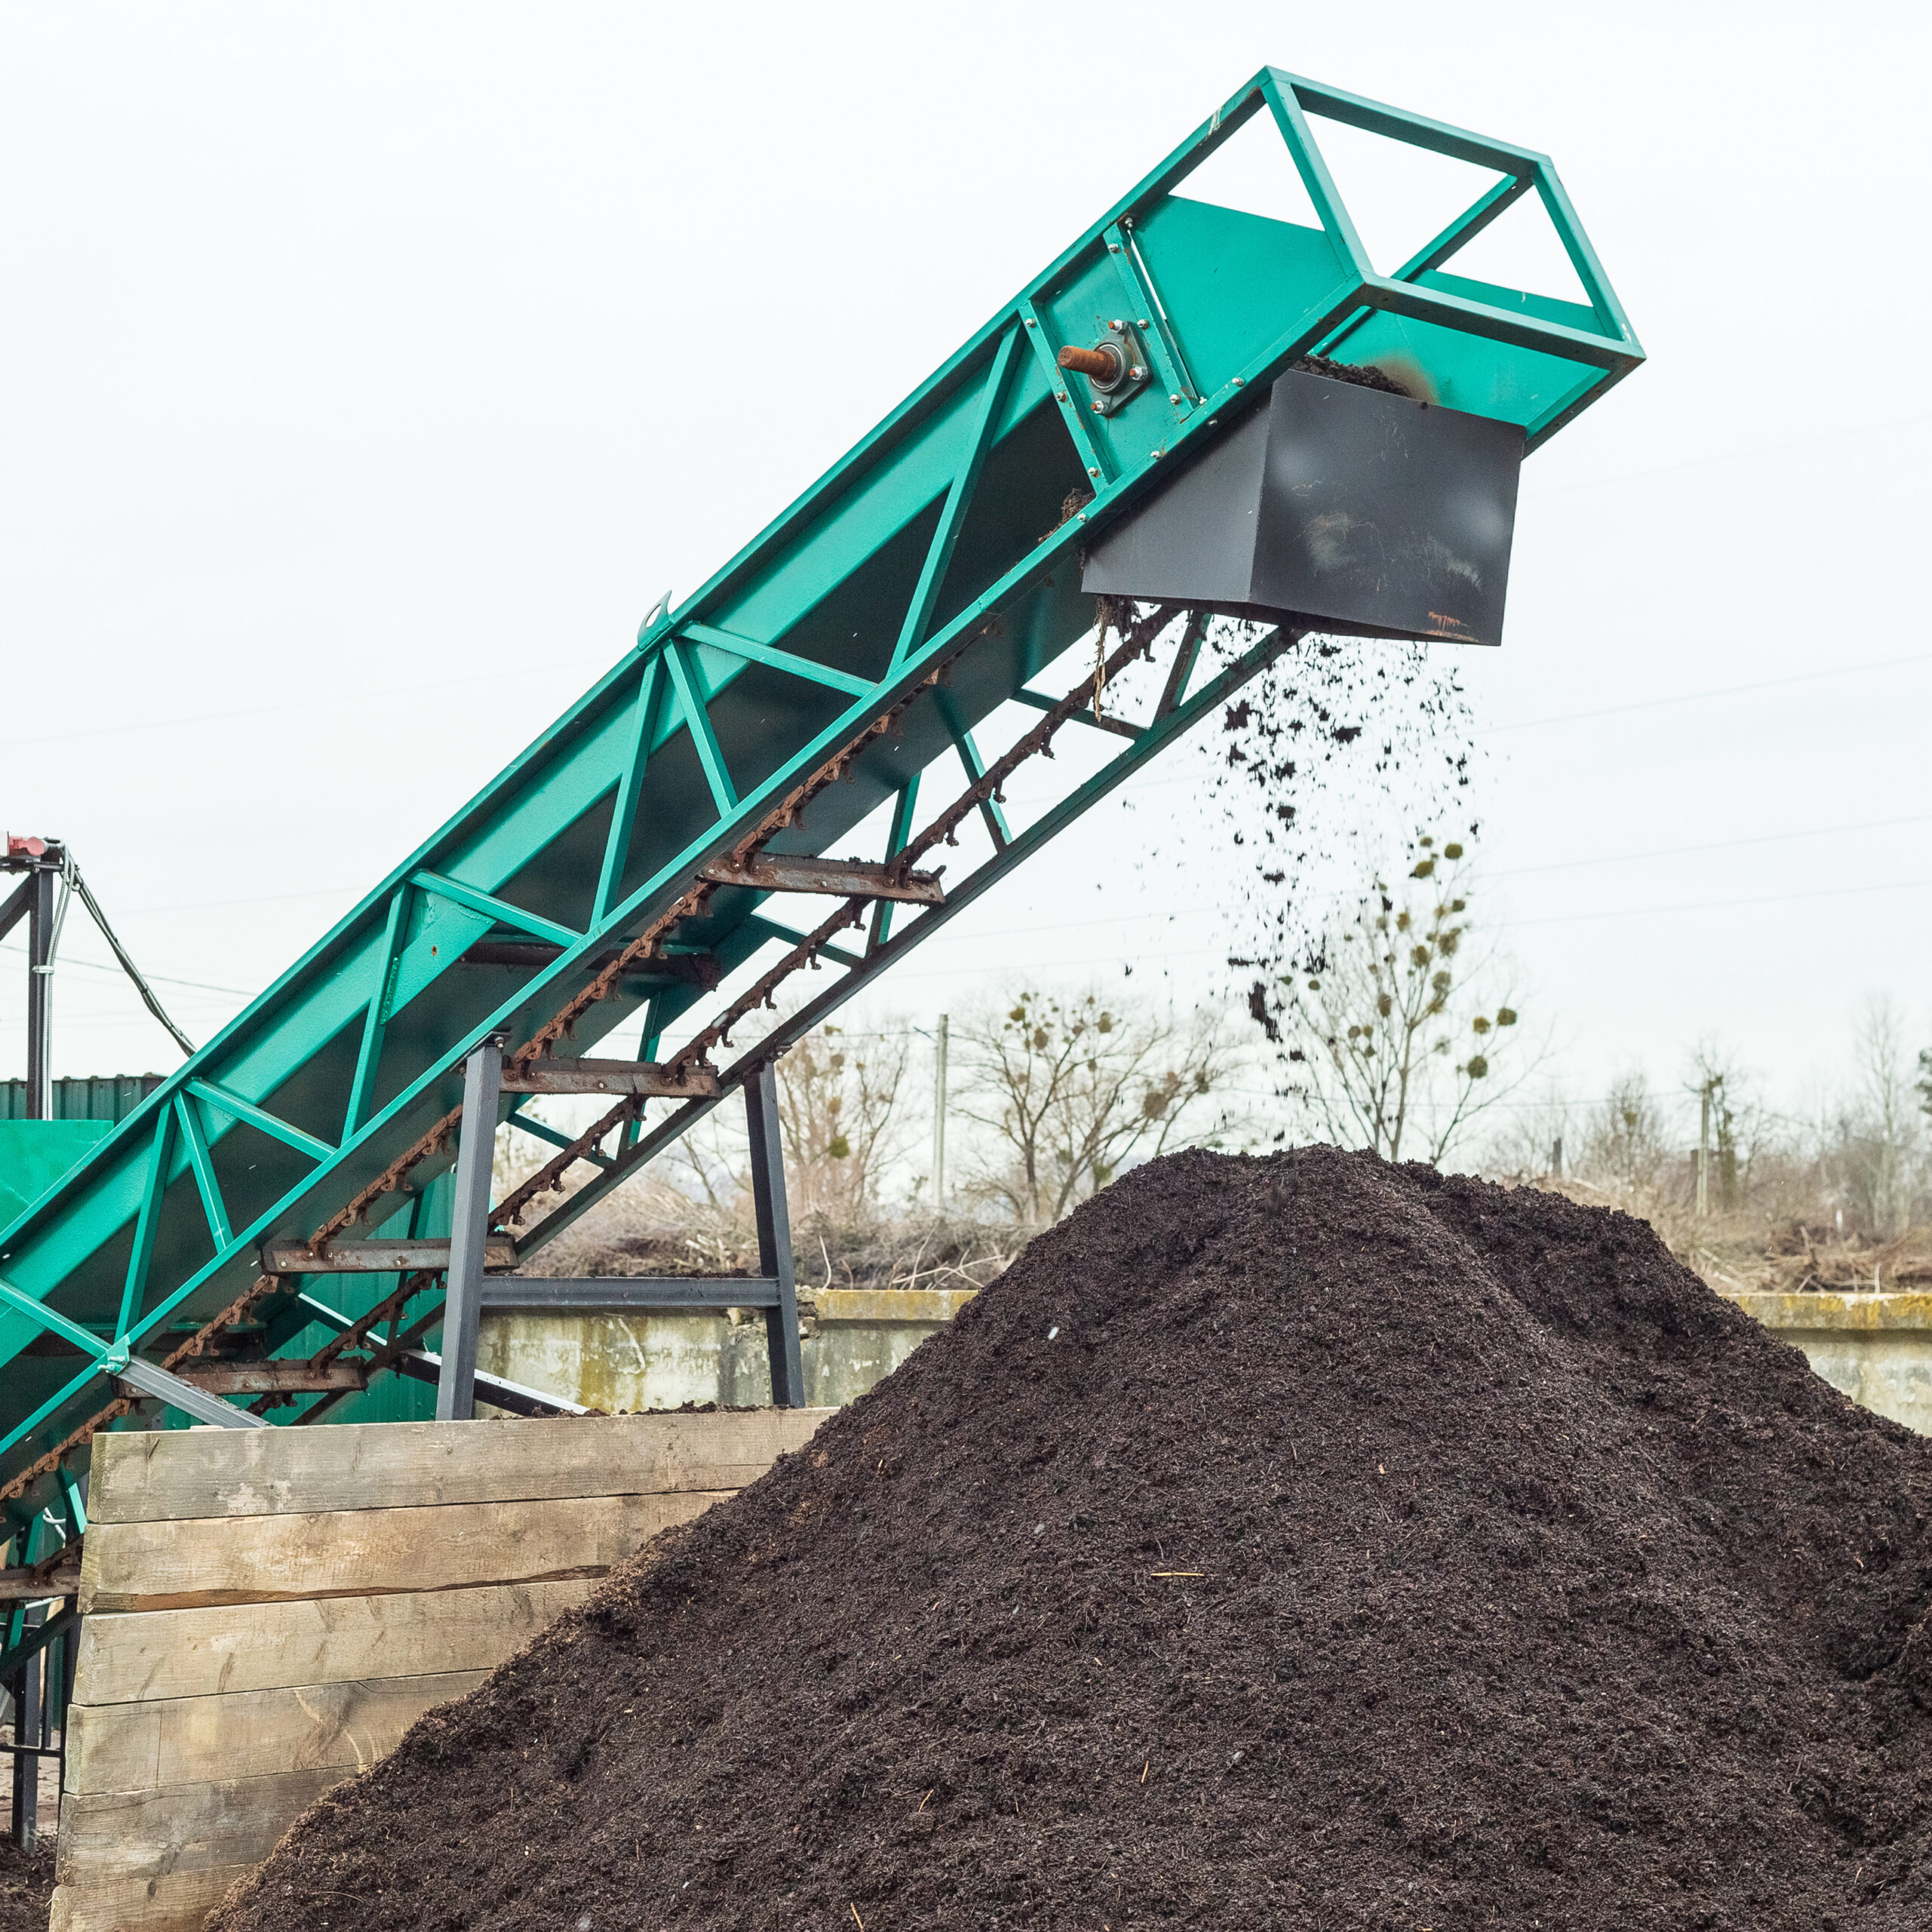 Producing soil at industrial compost plant. Sifting soil with a machinery to make clean earth ready to be used